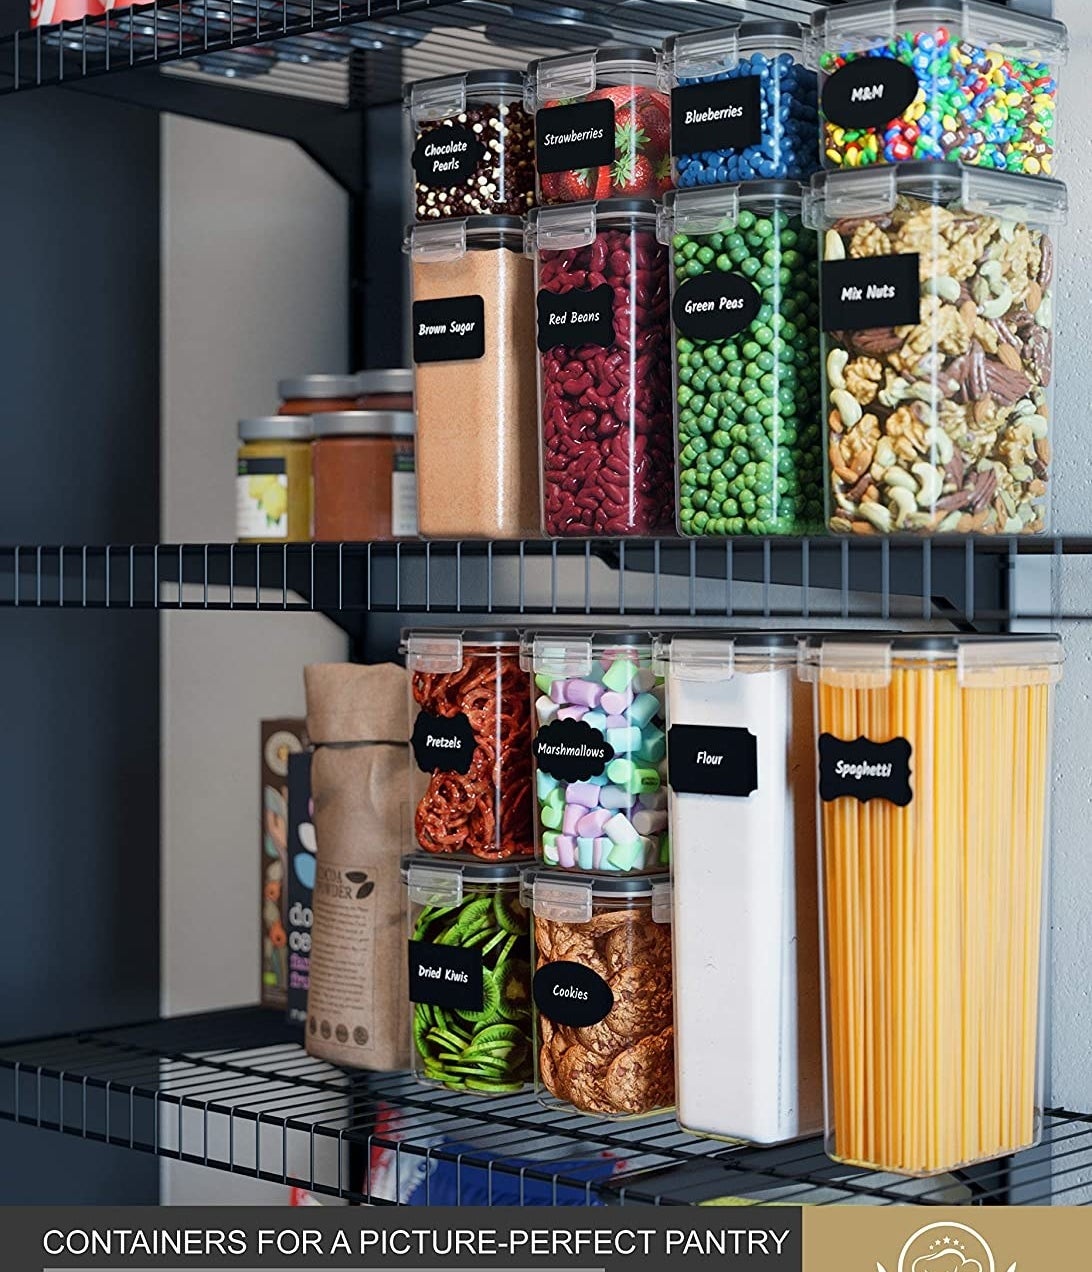 A set of plastic food containers with chalkboard labels arranged neatly on a pantry shelf